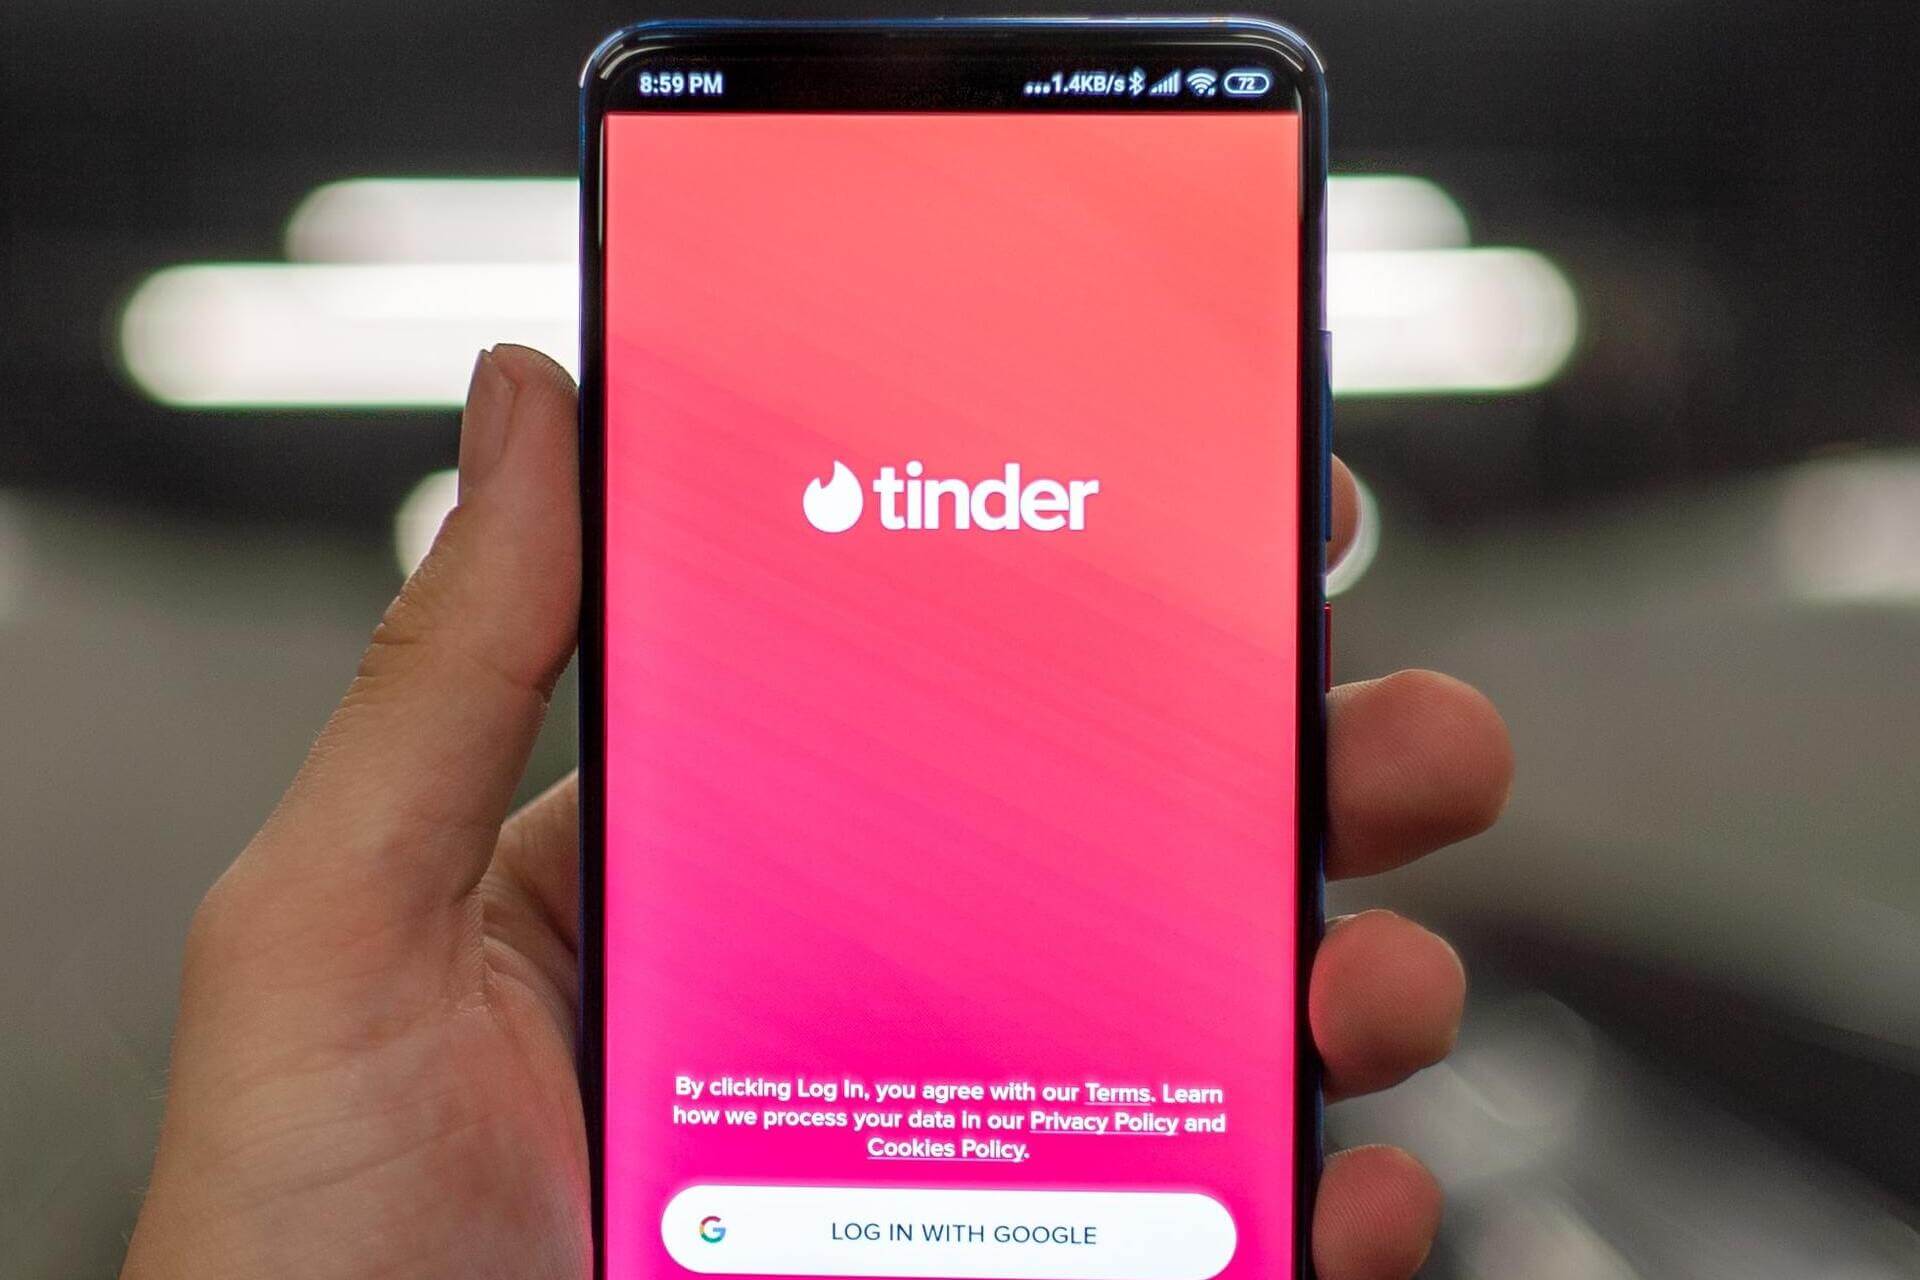 tinder there was an error updating your profile